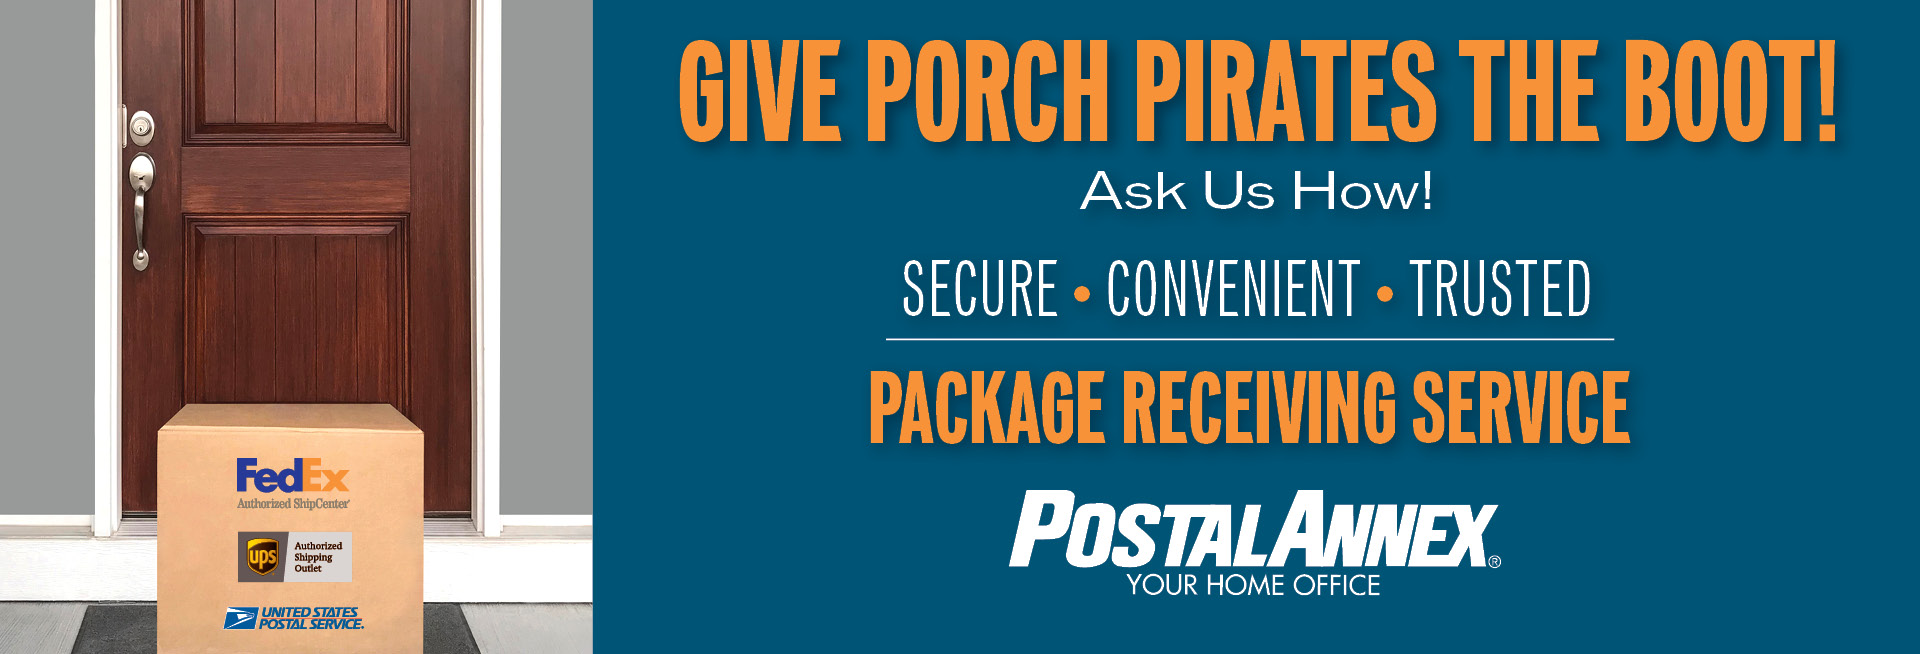 Package Receiving Services in Sorrento Valley